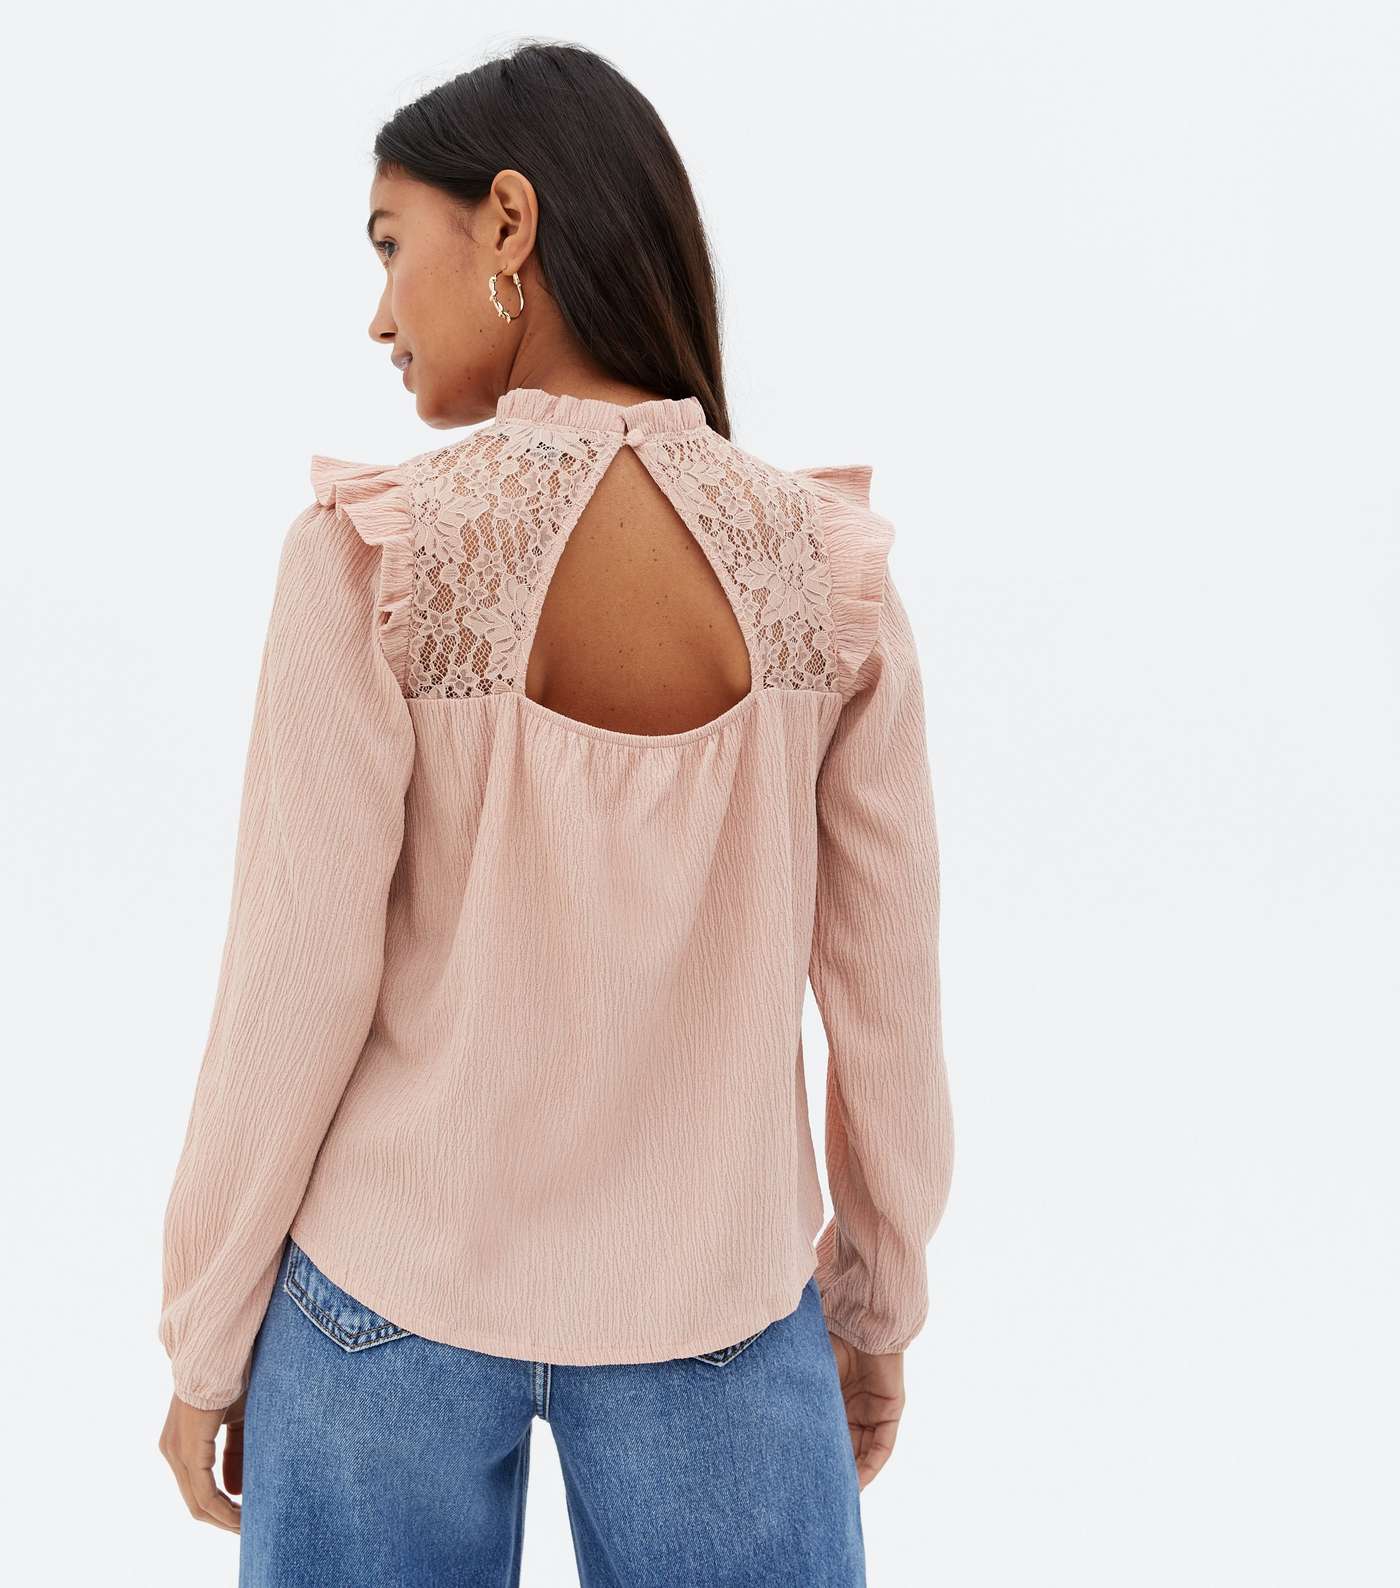 Pale Pink Textured Lace Yoke Frill High Neck Blouse Image 4